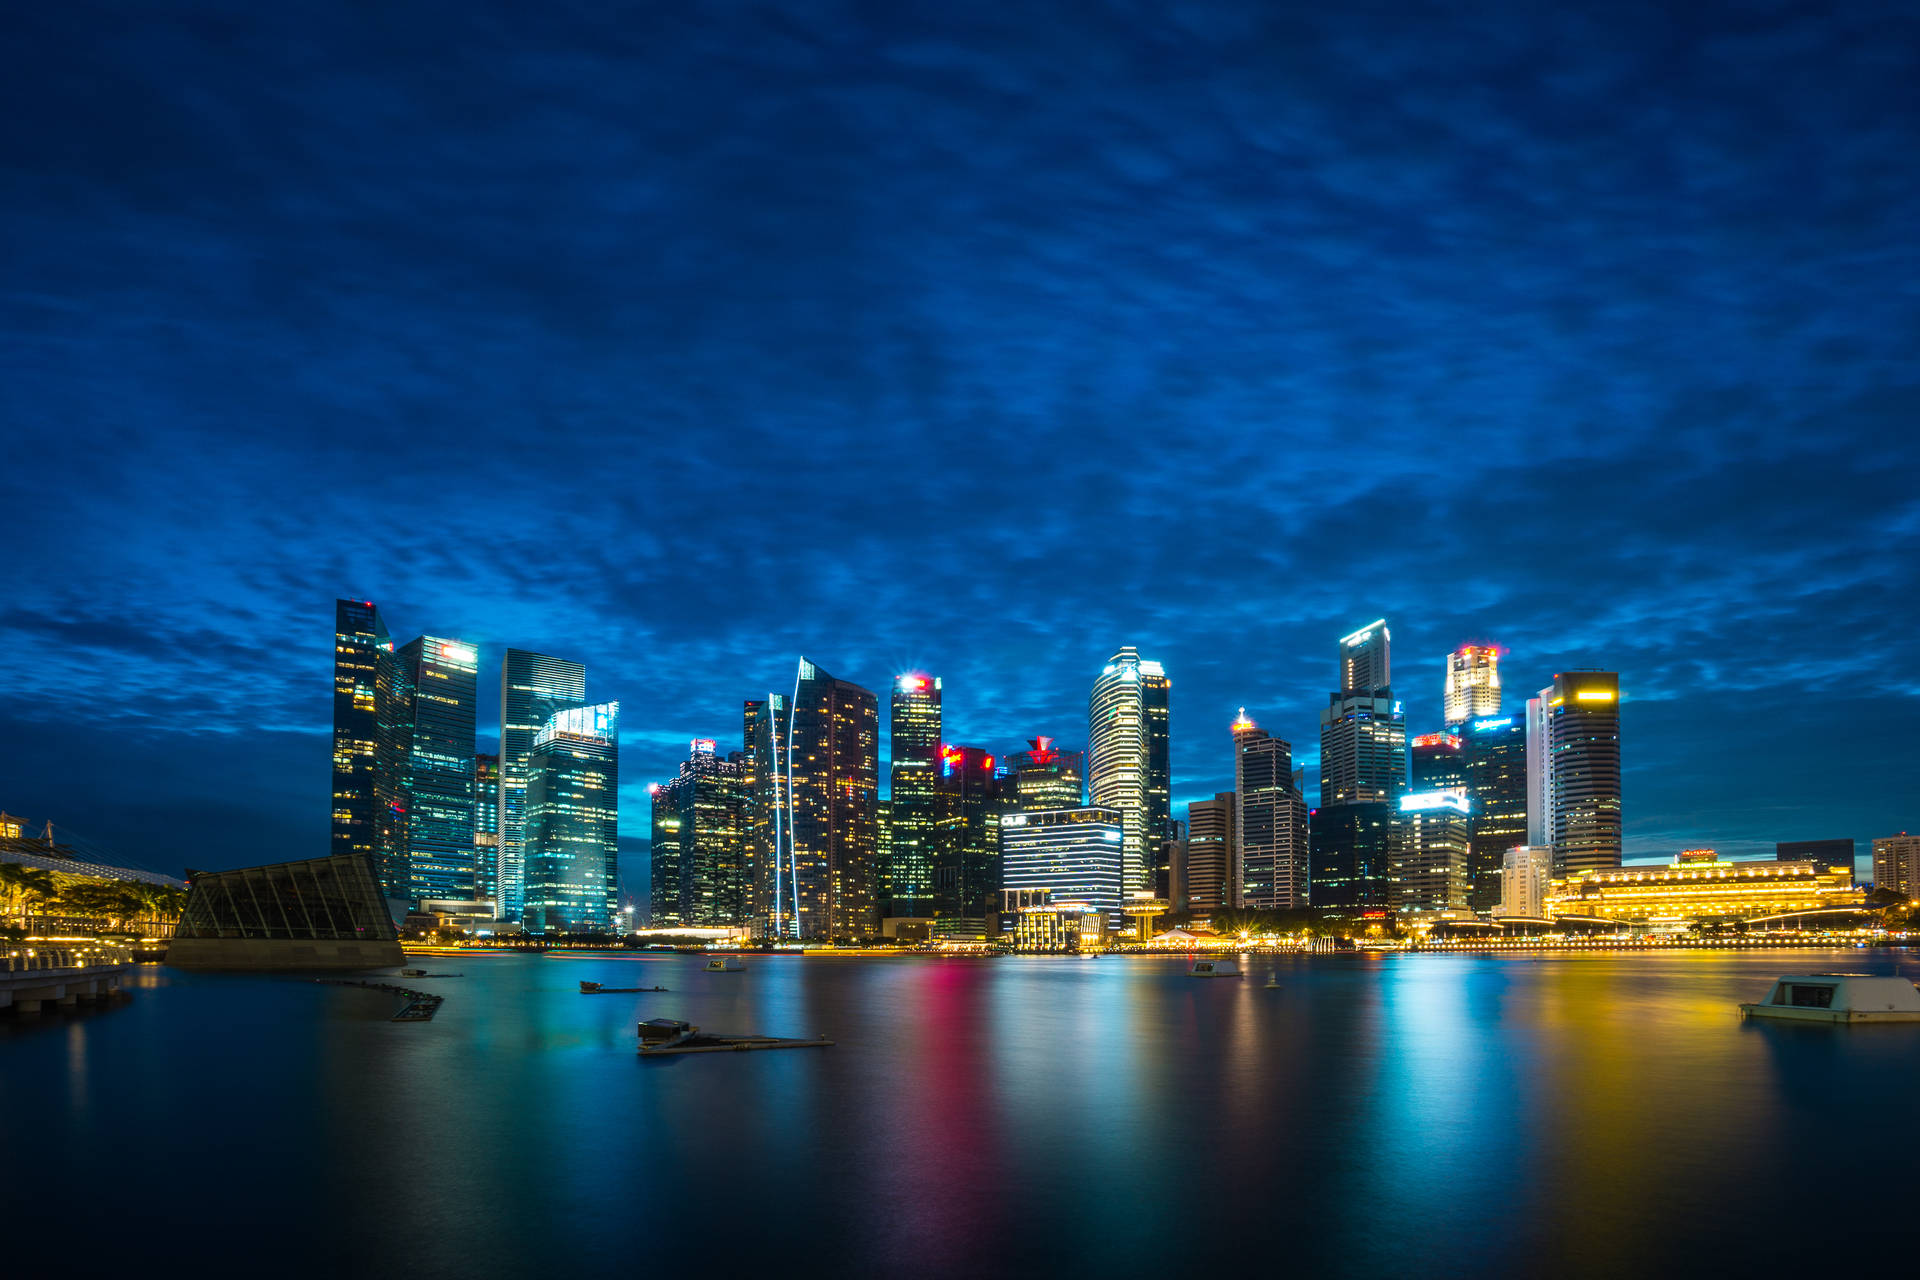 Free Singapore Wallpaper Downloads, [200+] Singapore Wallpapers for FREE |  